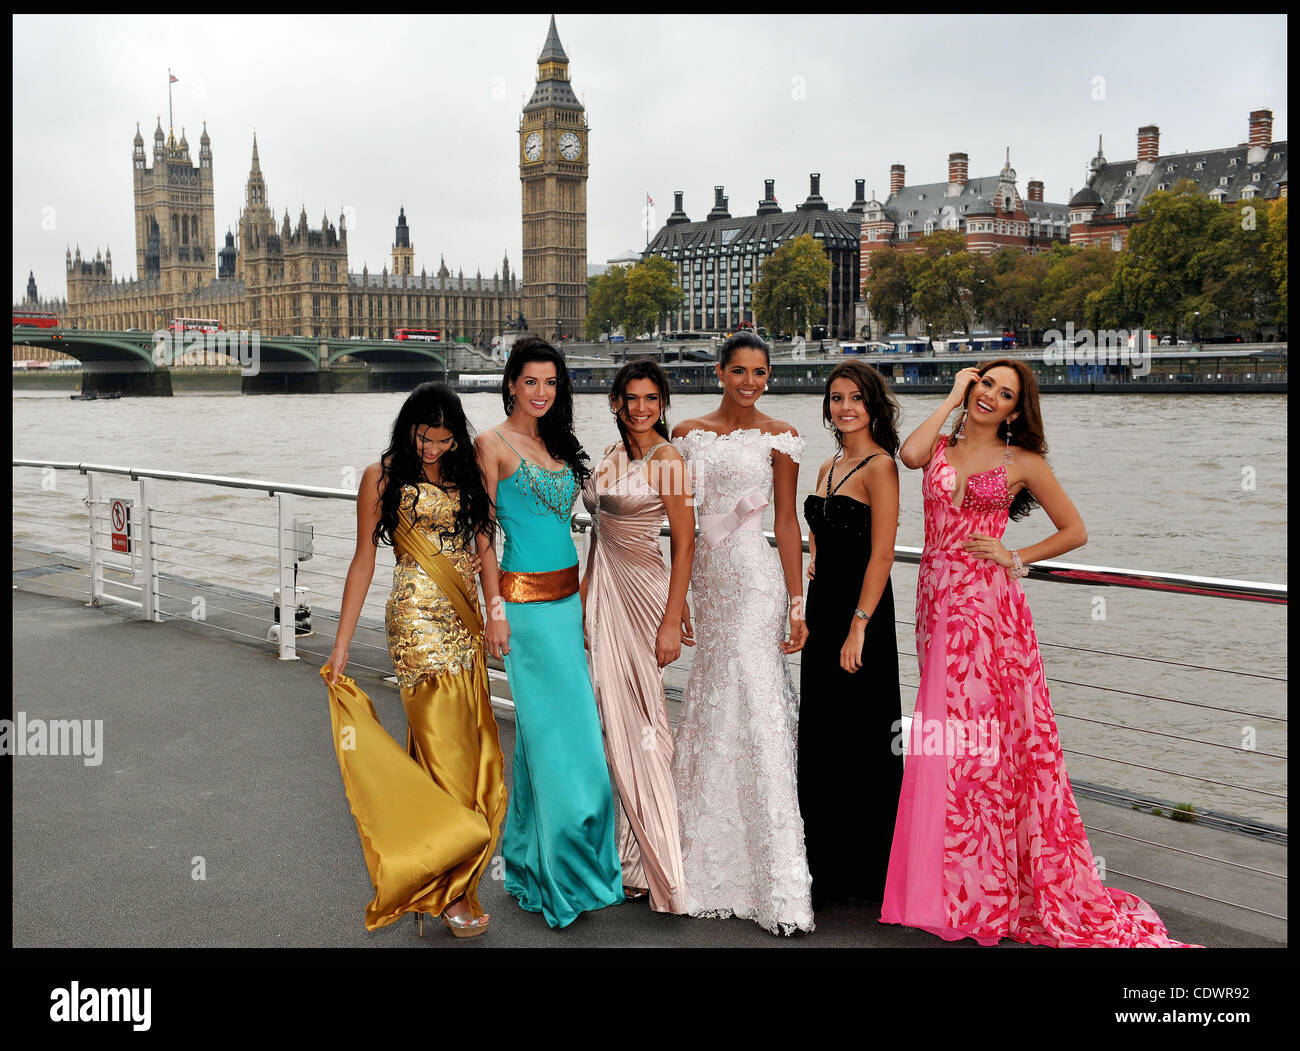 Oct. 31, 2011 - London, United Kingdom - Photocall at the London Eye for the 60th Birthday of the Miss World contest to be held on Sunday November 6th, 2011, at Earls Court, London, L TO R Miss Argentina,Miss Brazil,Miss Chile, Miss Venezuela,Miss Columbia  Monday October 31, 2011. Photo By Andrew P Stock Photo